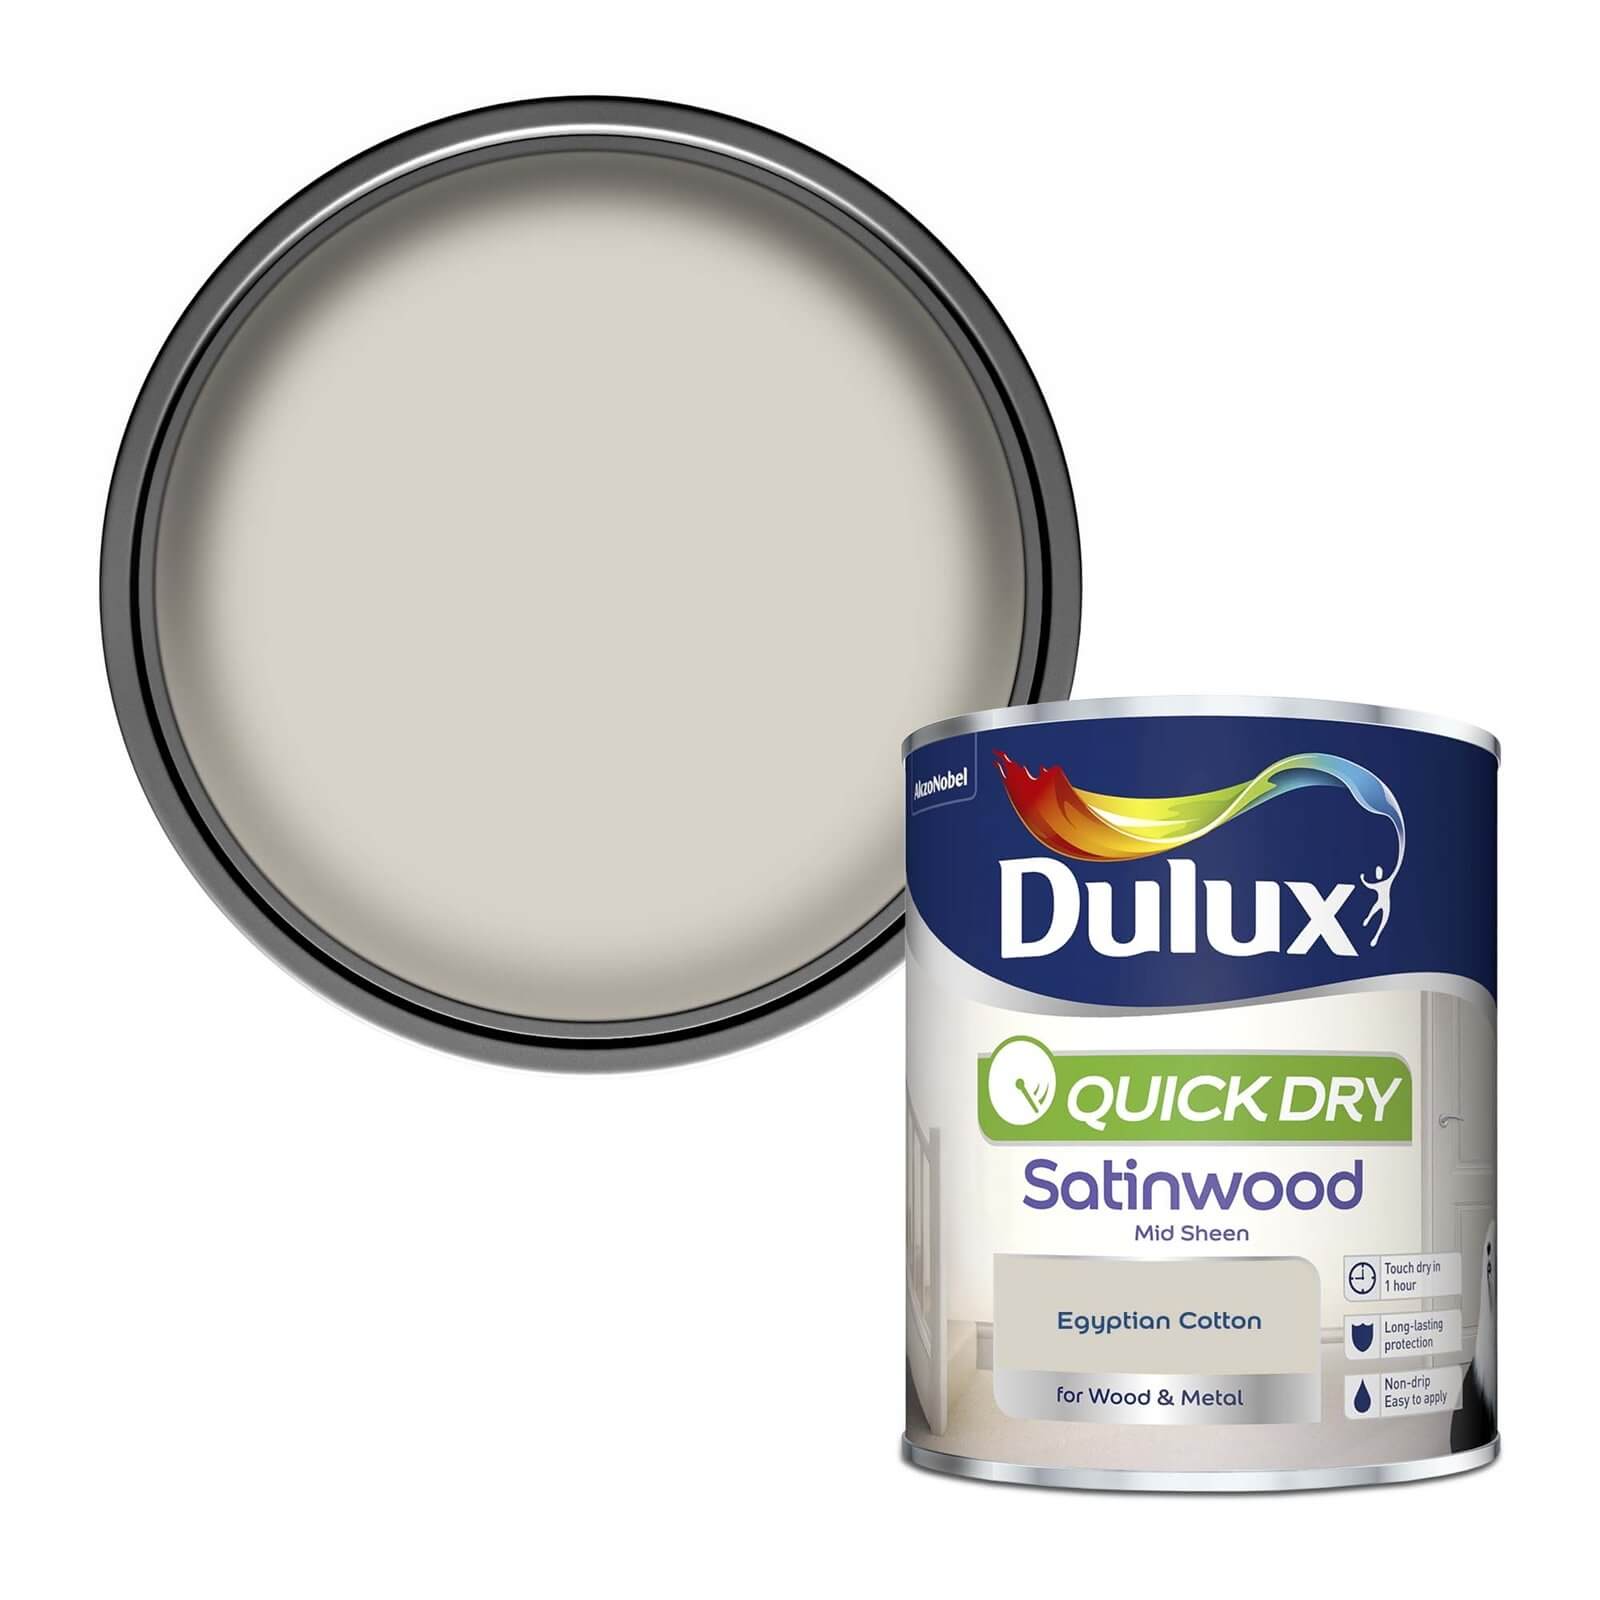 Photo of Dulux Egyptian Cotton - Quick Dry Satinwood - 750ml